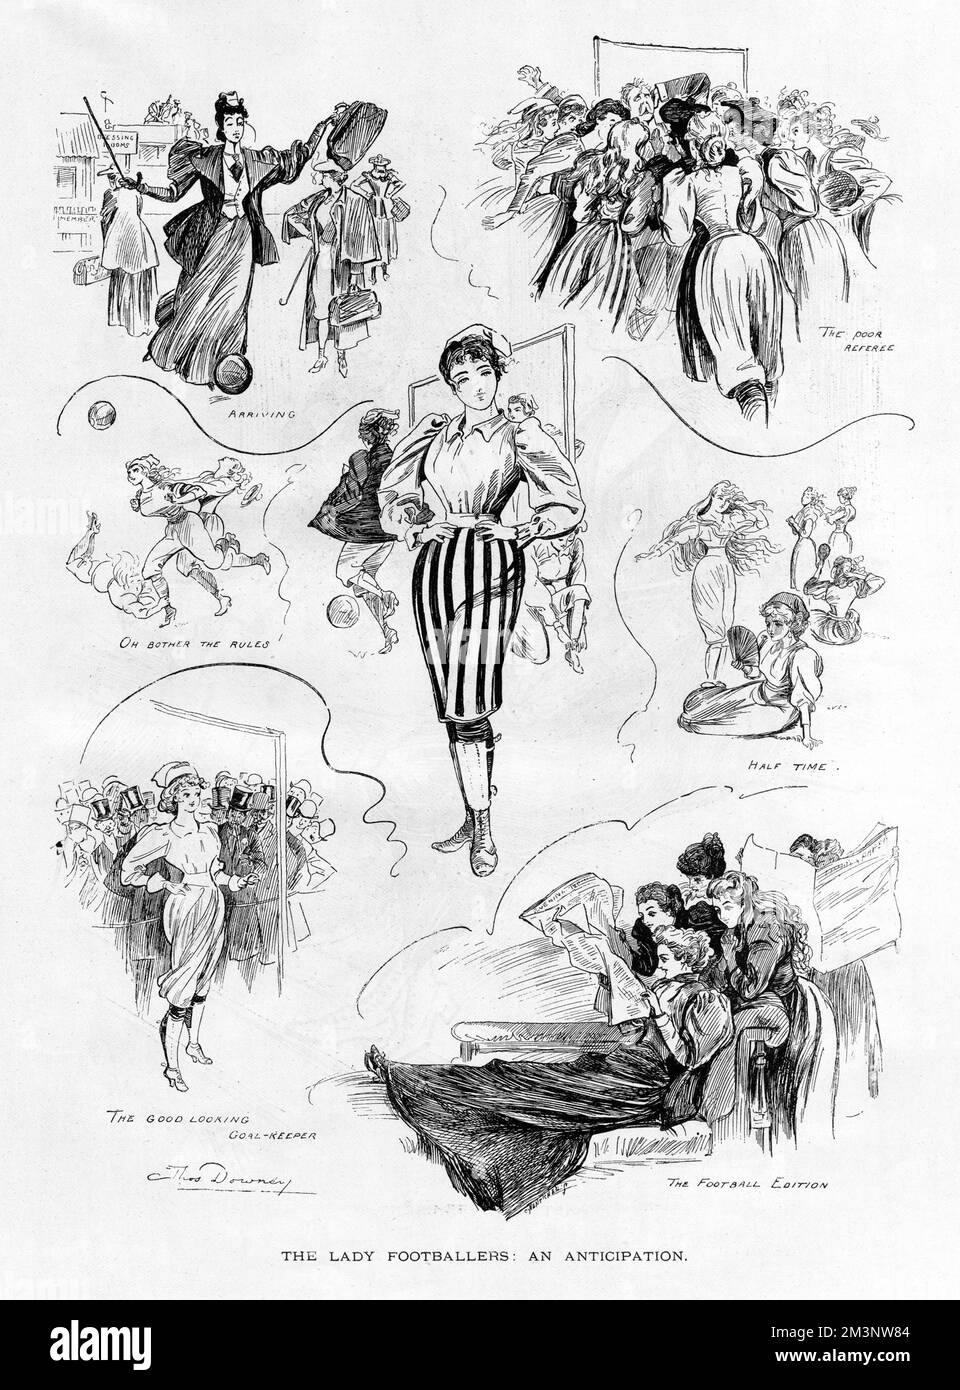 The lady footballers: an anticipation. The Sketch anticipates the brave new world of women footballers: a good looking goalkeeper receives much attention, the referee is mobbed by a posse of argumentative women, and two over-enthusiastic ladies attempt a dirty tackle on a member of the opposite team.  1894 Stock Photo